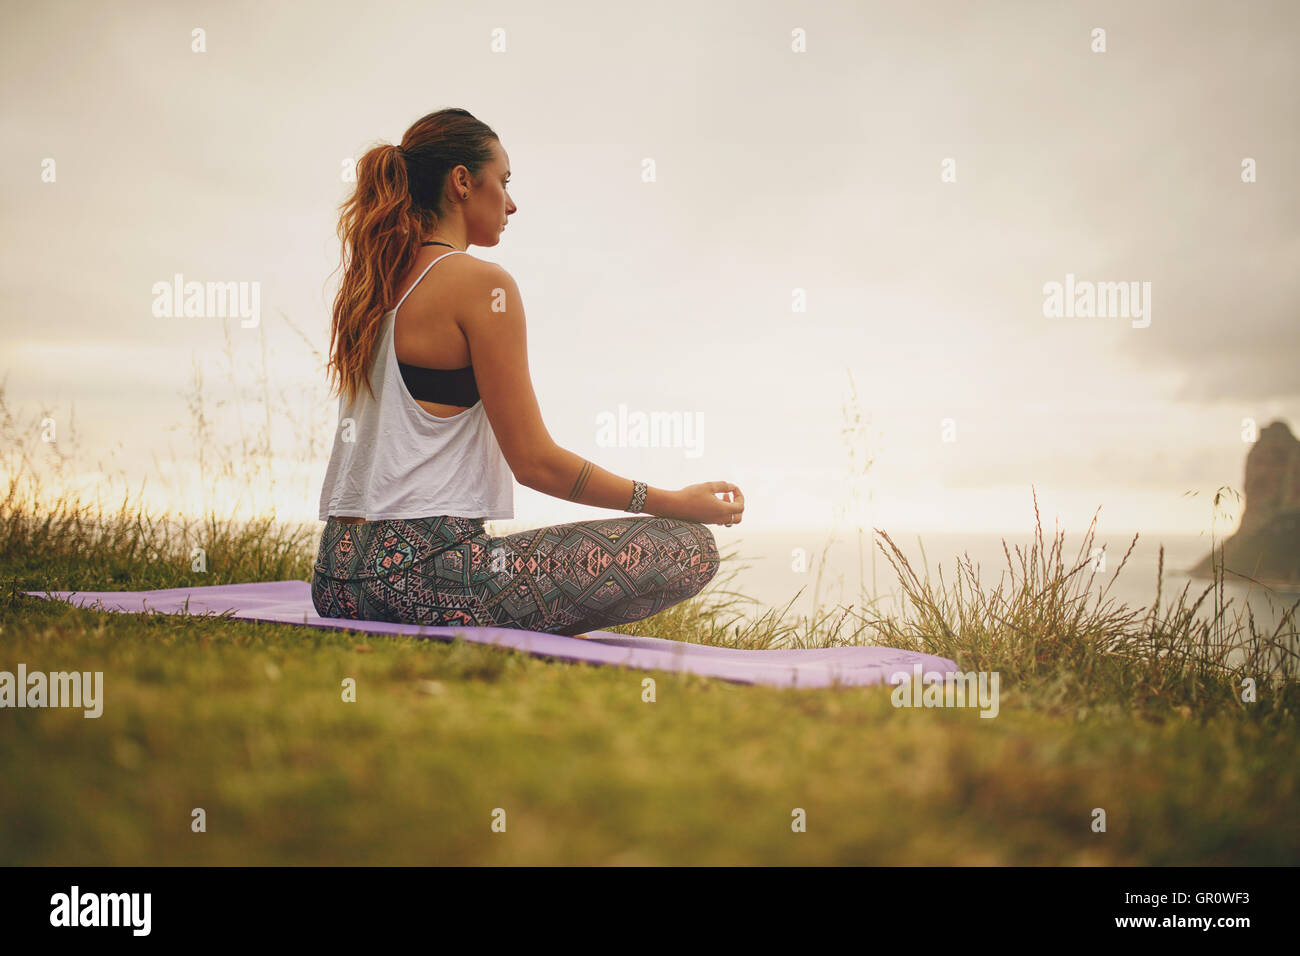 Rear view of young woman doing yoga meditation outdoors. fitness female model practicing yoga. Stock Photo